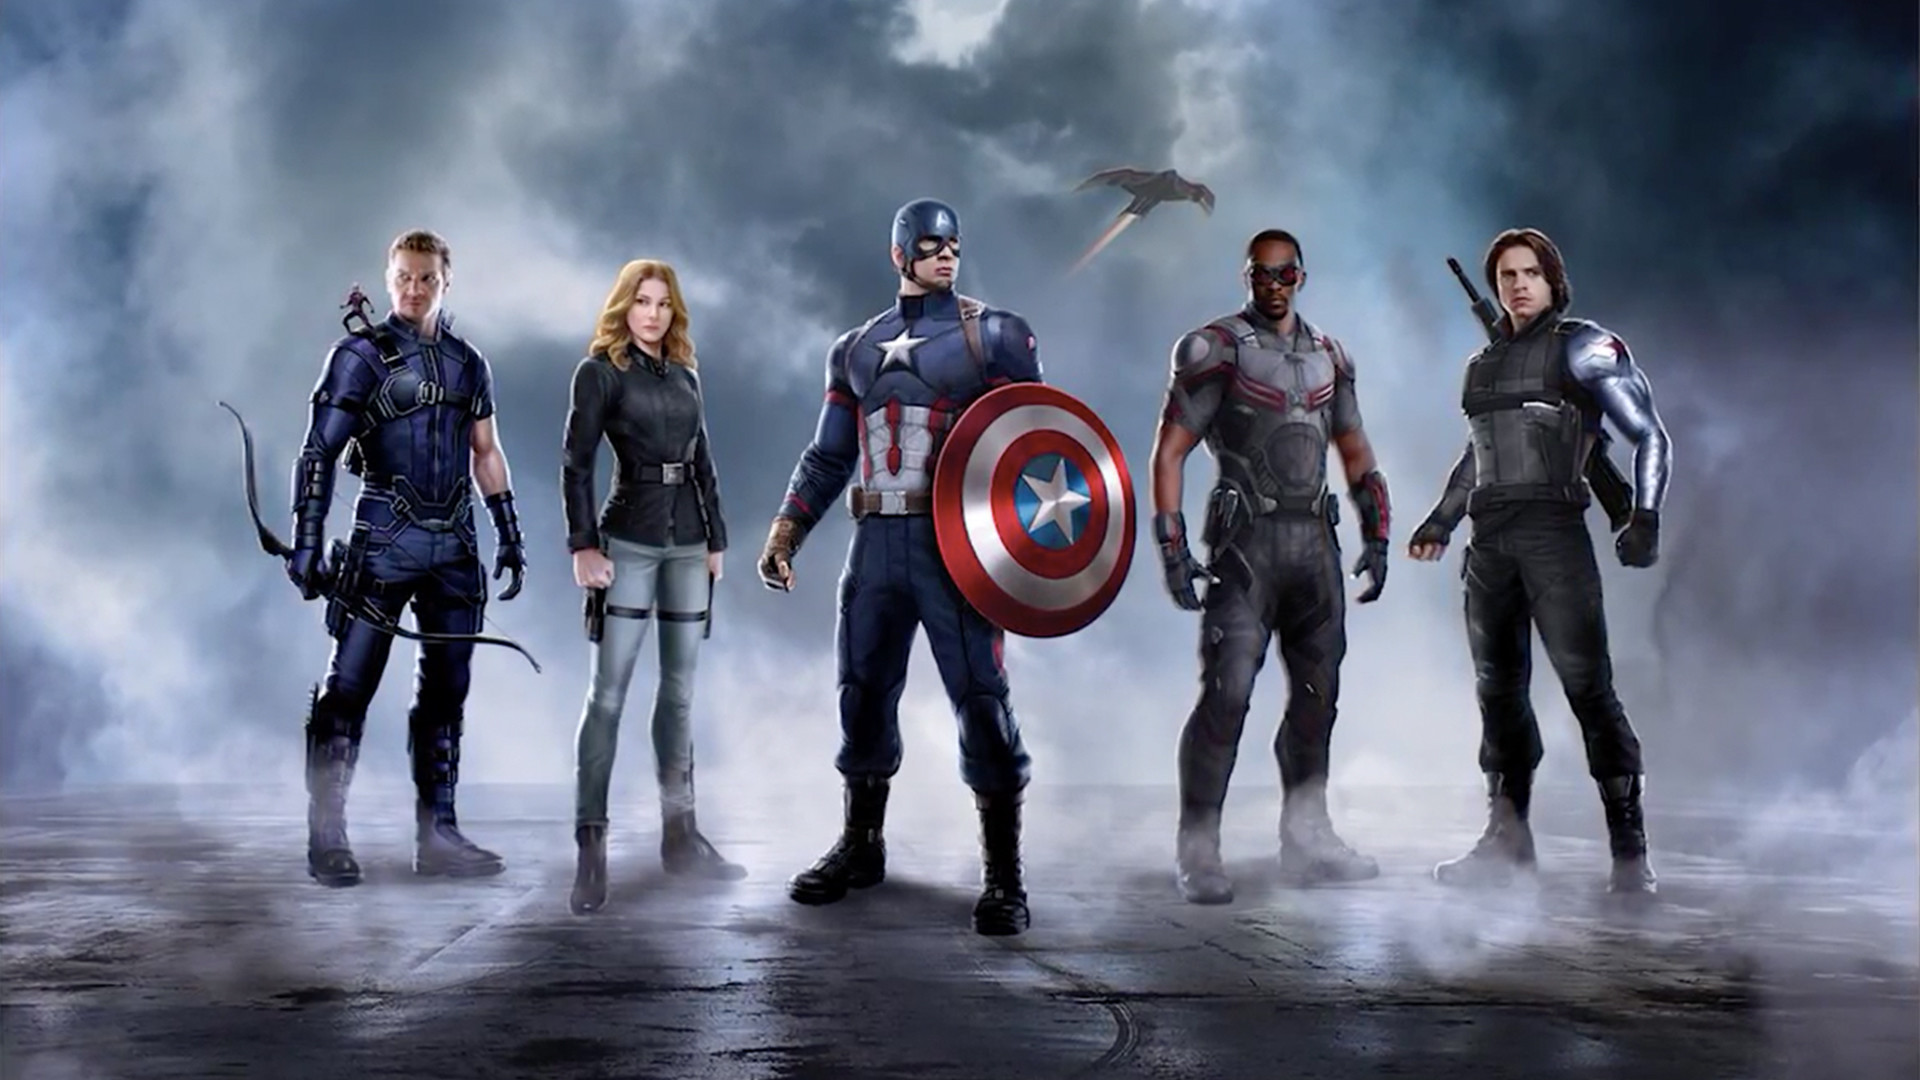 1920x1080 Free Fine Captain America Civil War Images on your Ipad